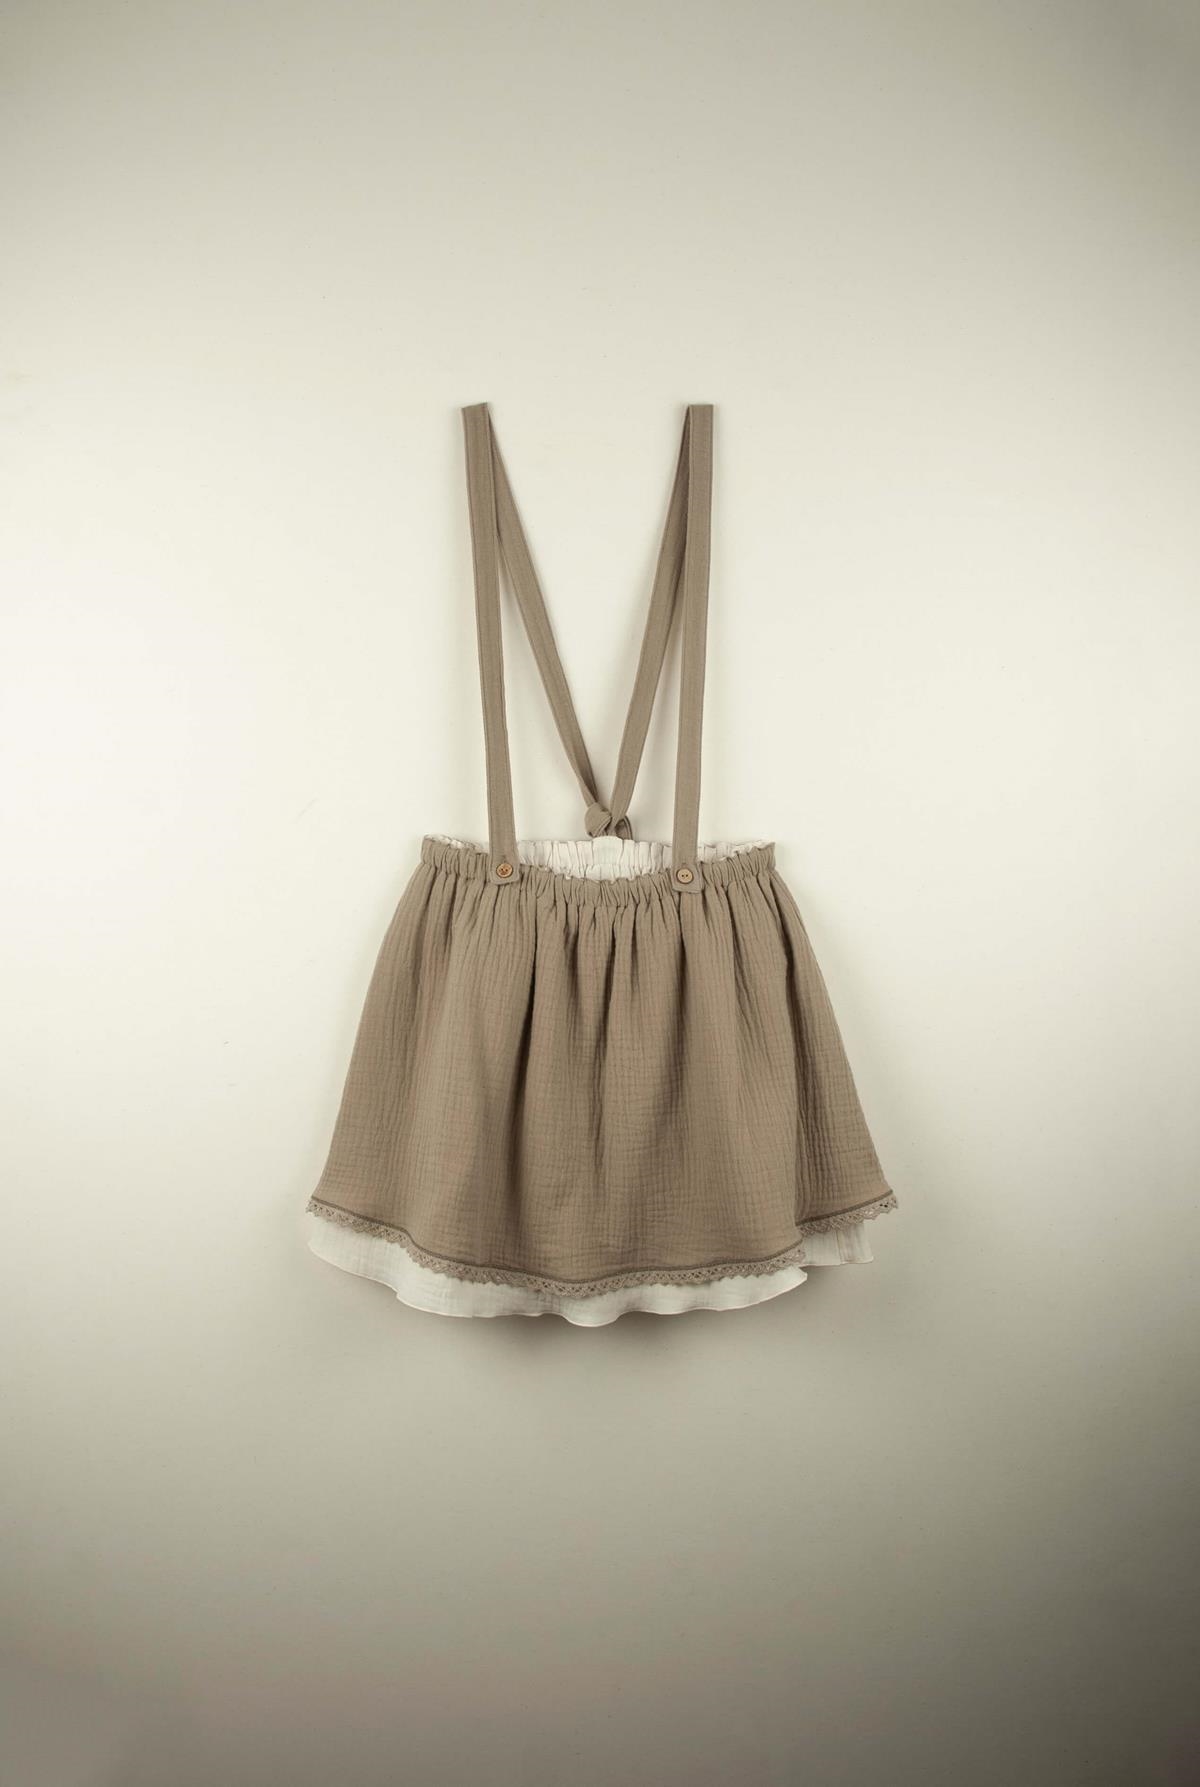 Mod.20.2 Taupe skirt with removable straps | AW21.22 Mod.20.2 Taupe skirt with removable straps | 1